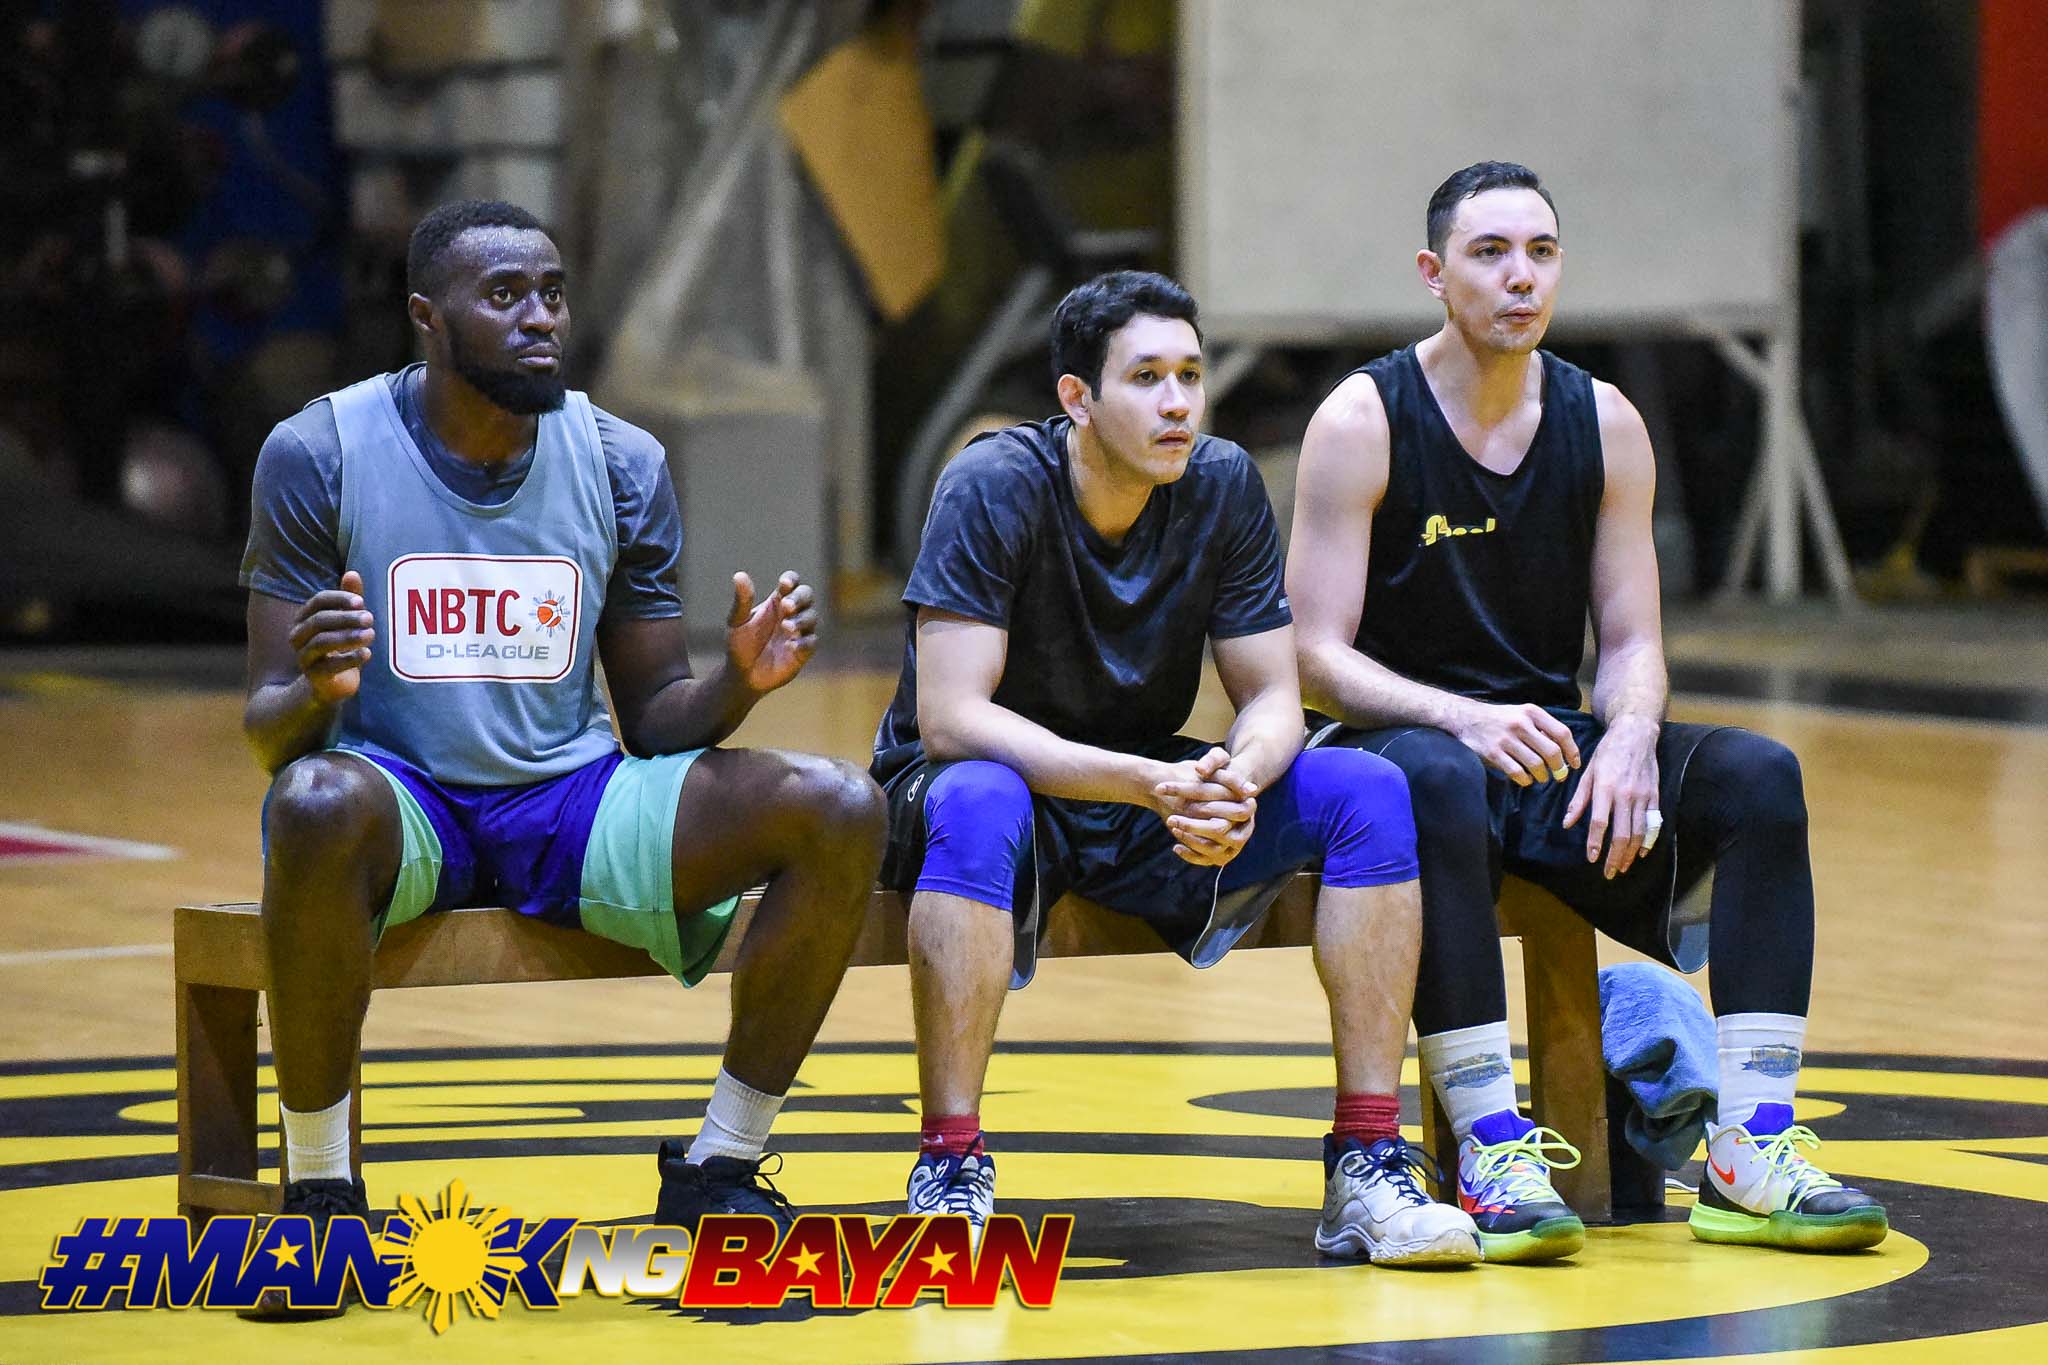 2019-CHOOKS-TO-GO-PILIPINAS-3X3-PRESIDENTS-CUP-PASIG-LEO-DE-VERA-X-ABABOU Still not in peak form, Dylan Ababou looks to provide leadership to Pasig in Kunshan 3x3 Basketball Chooks-to-Go Pilipinas 3x3 News  - philippine sports news